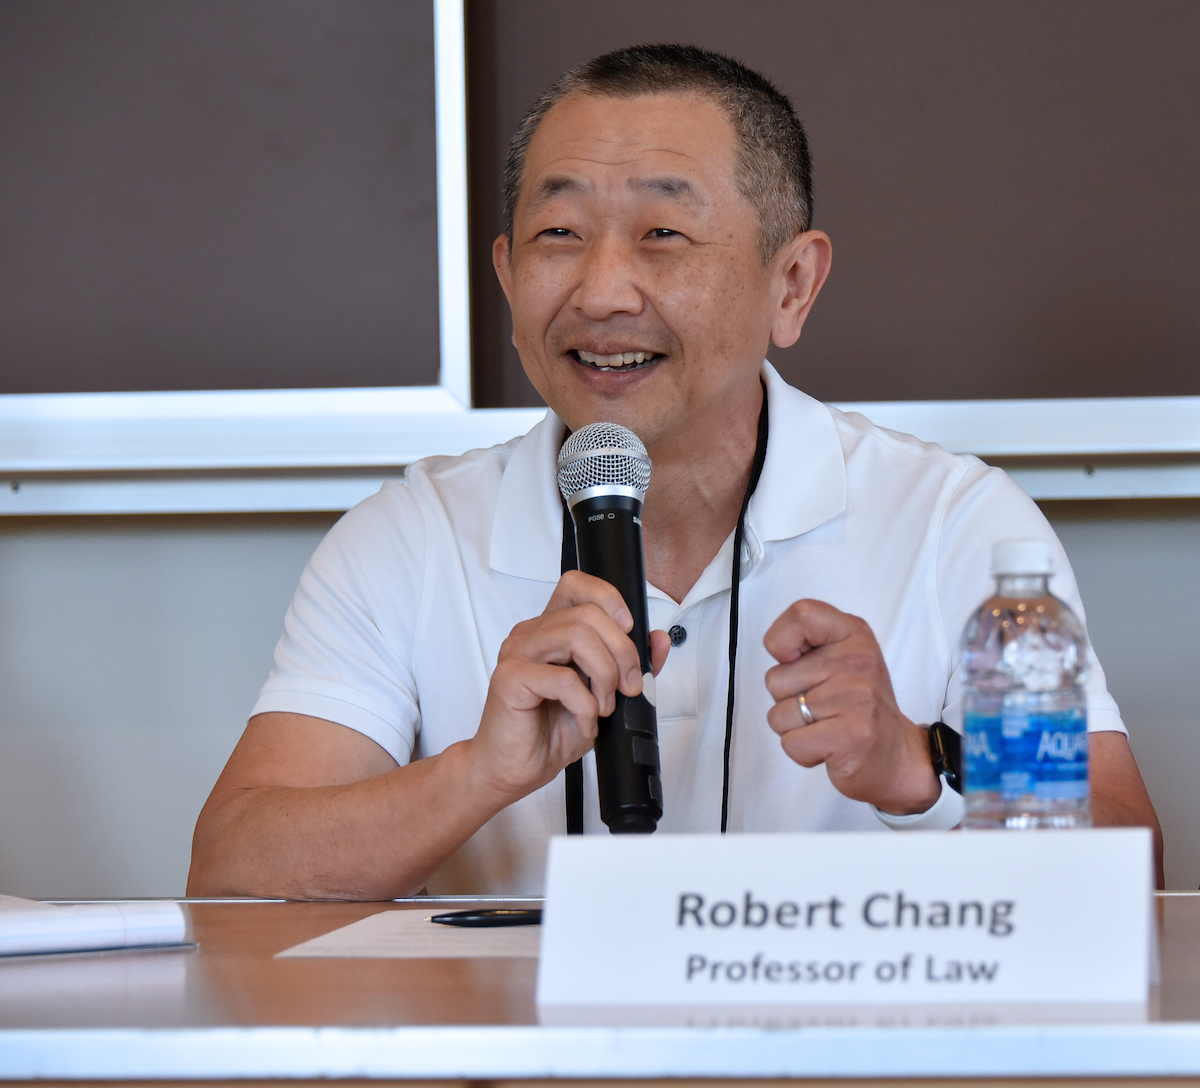 Robert S. Chang, Professor of Law and Executive Director, Fred T. Korematsu Center for Law and Equality, Seattle University School of Law